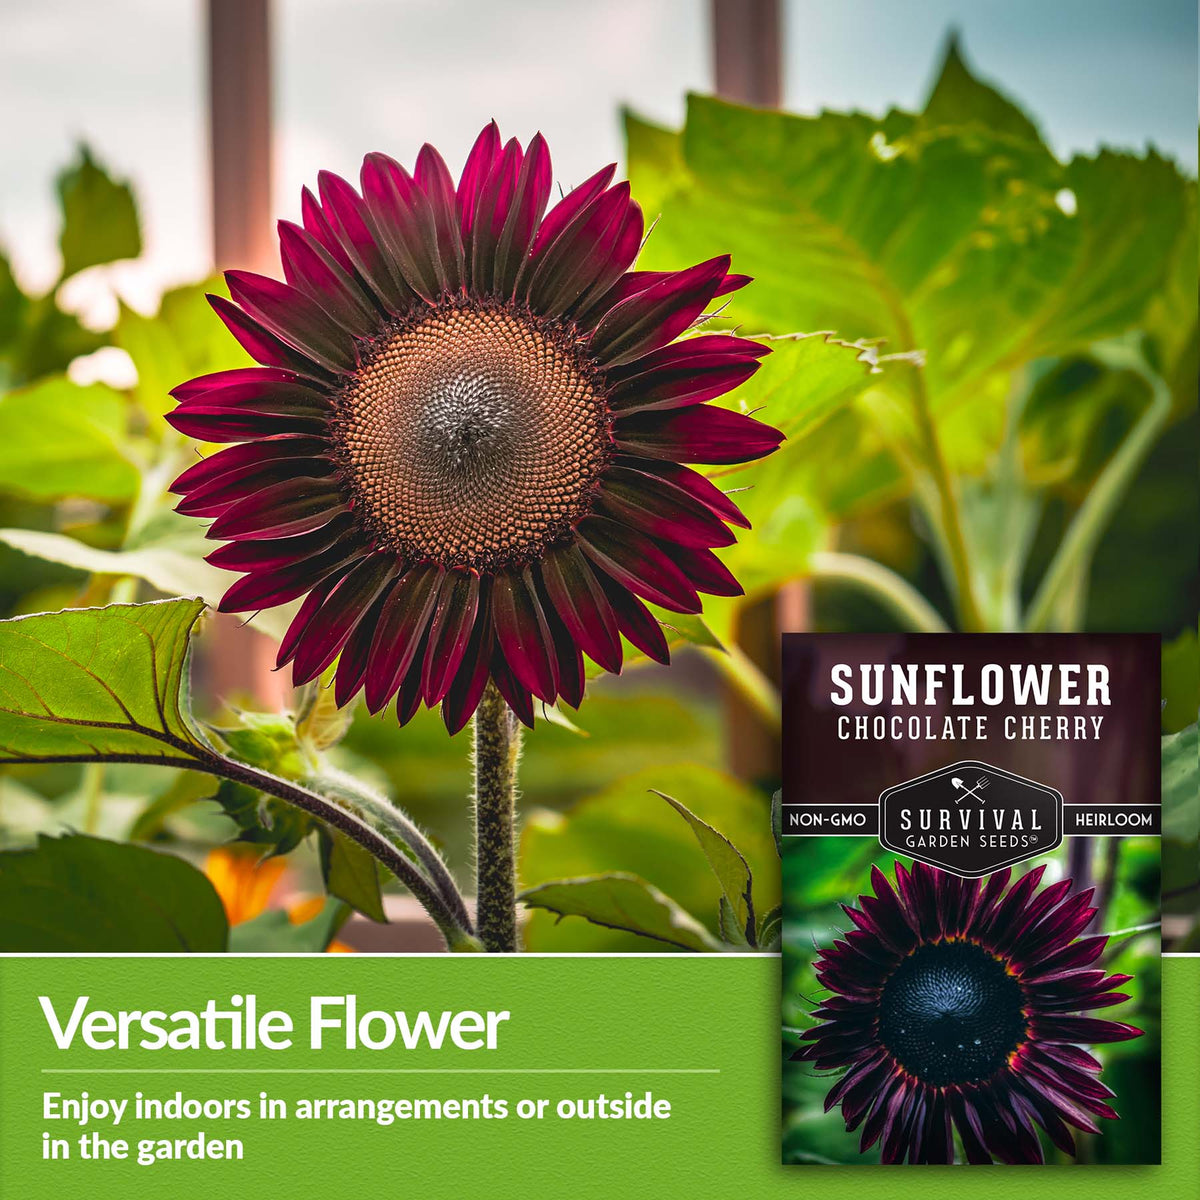 Chocolate Cherry Sunflowers can be enjoyed indoors in arrangements or outdoors in the garden